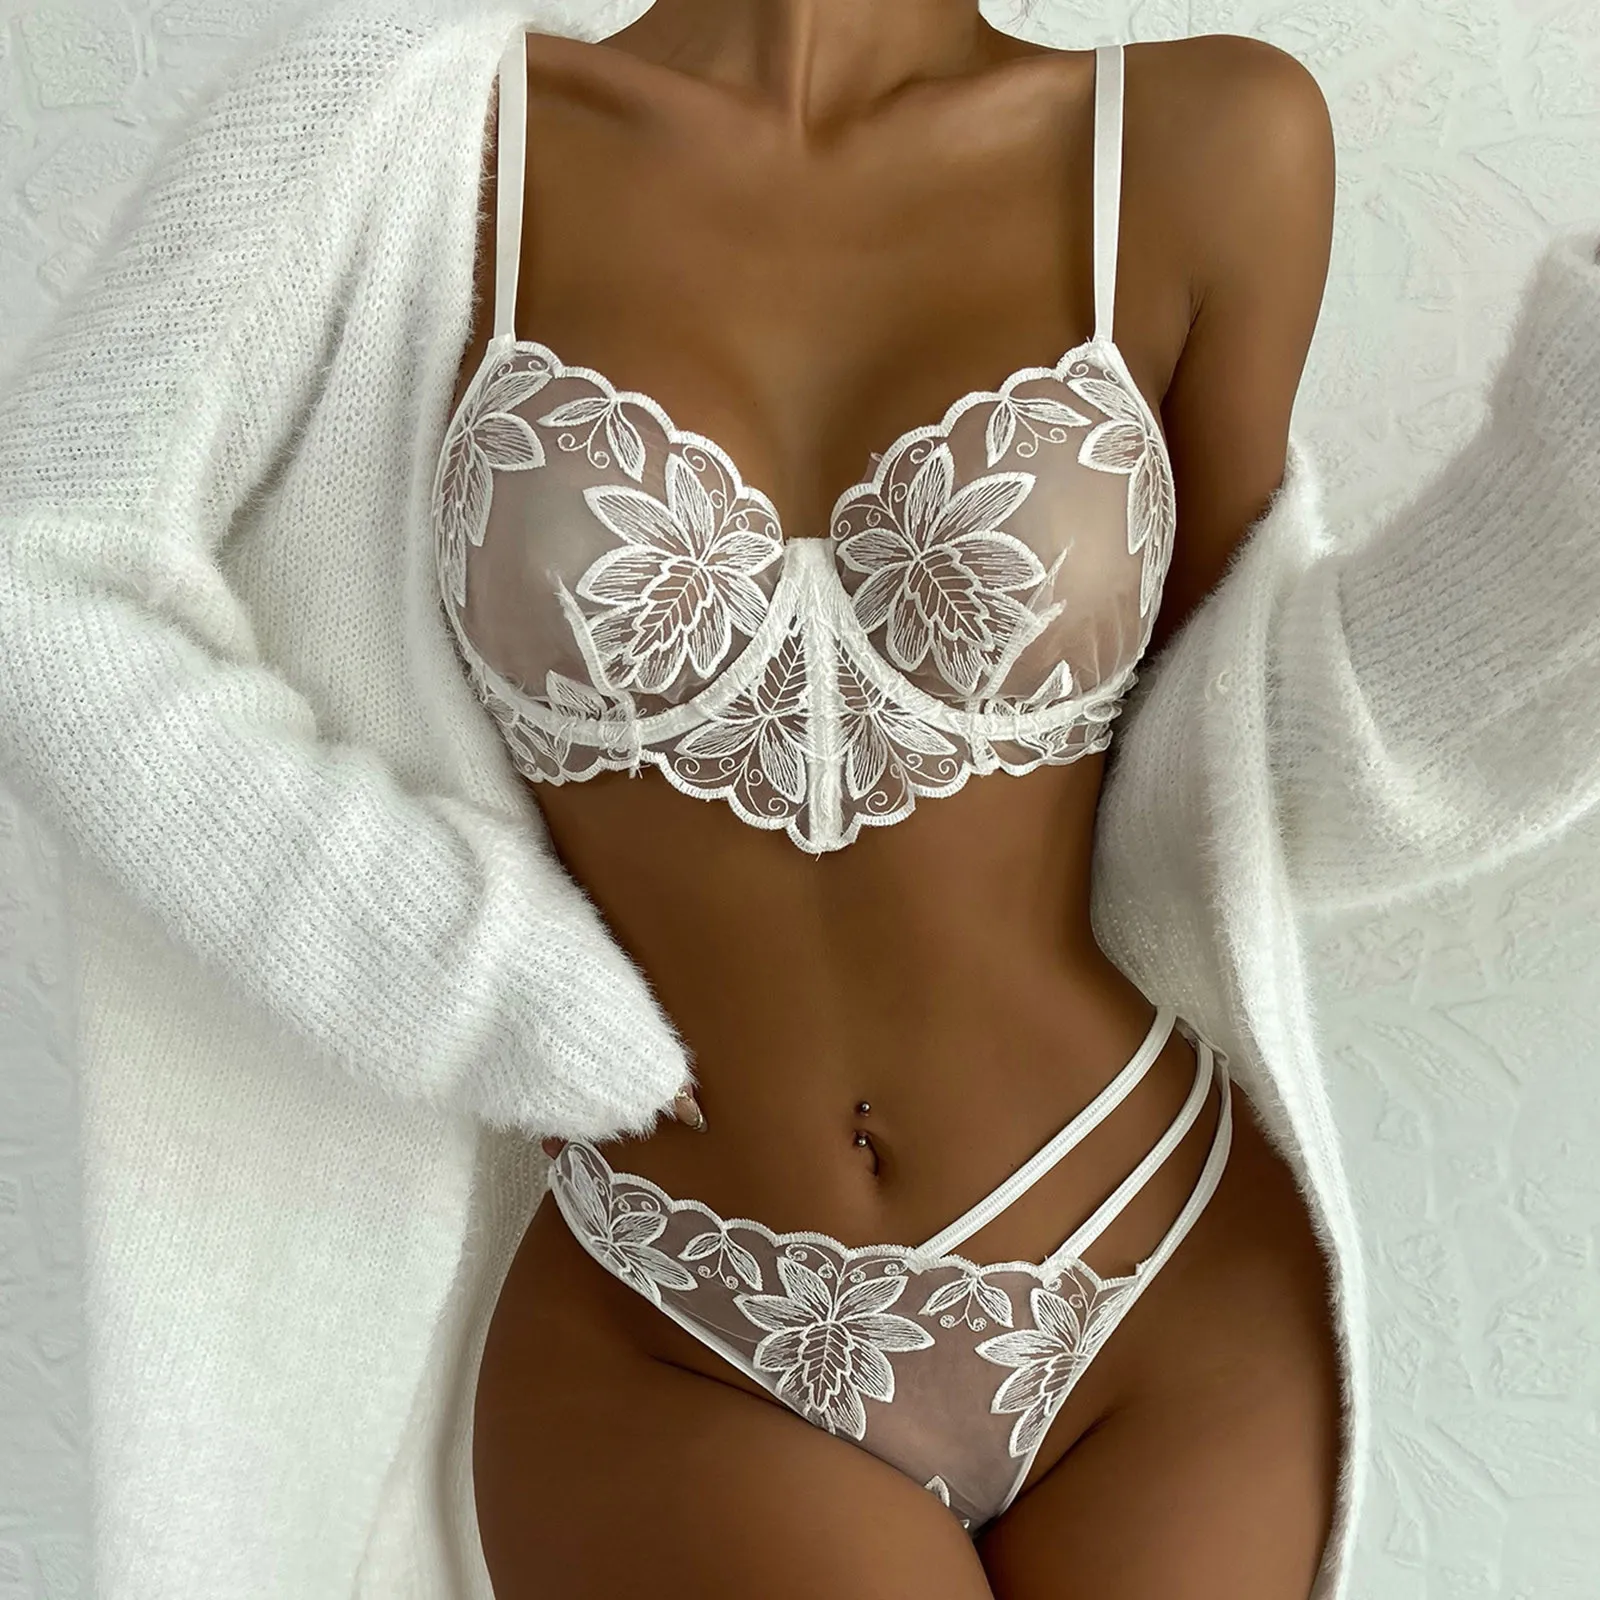 

Women Lingerie Set Lingerie Underwear Erotic Intimate Two Piece Bowknot Transparent Mesh Lace Steel Ring Bra Thongs Underwire